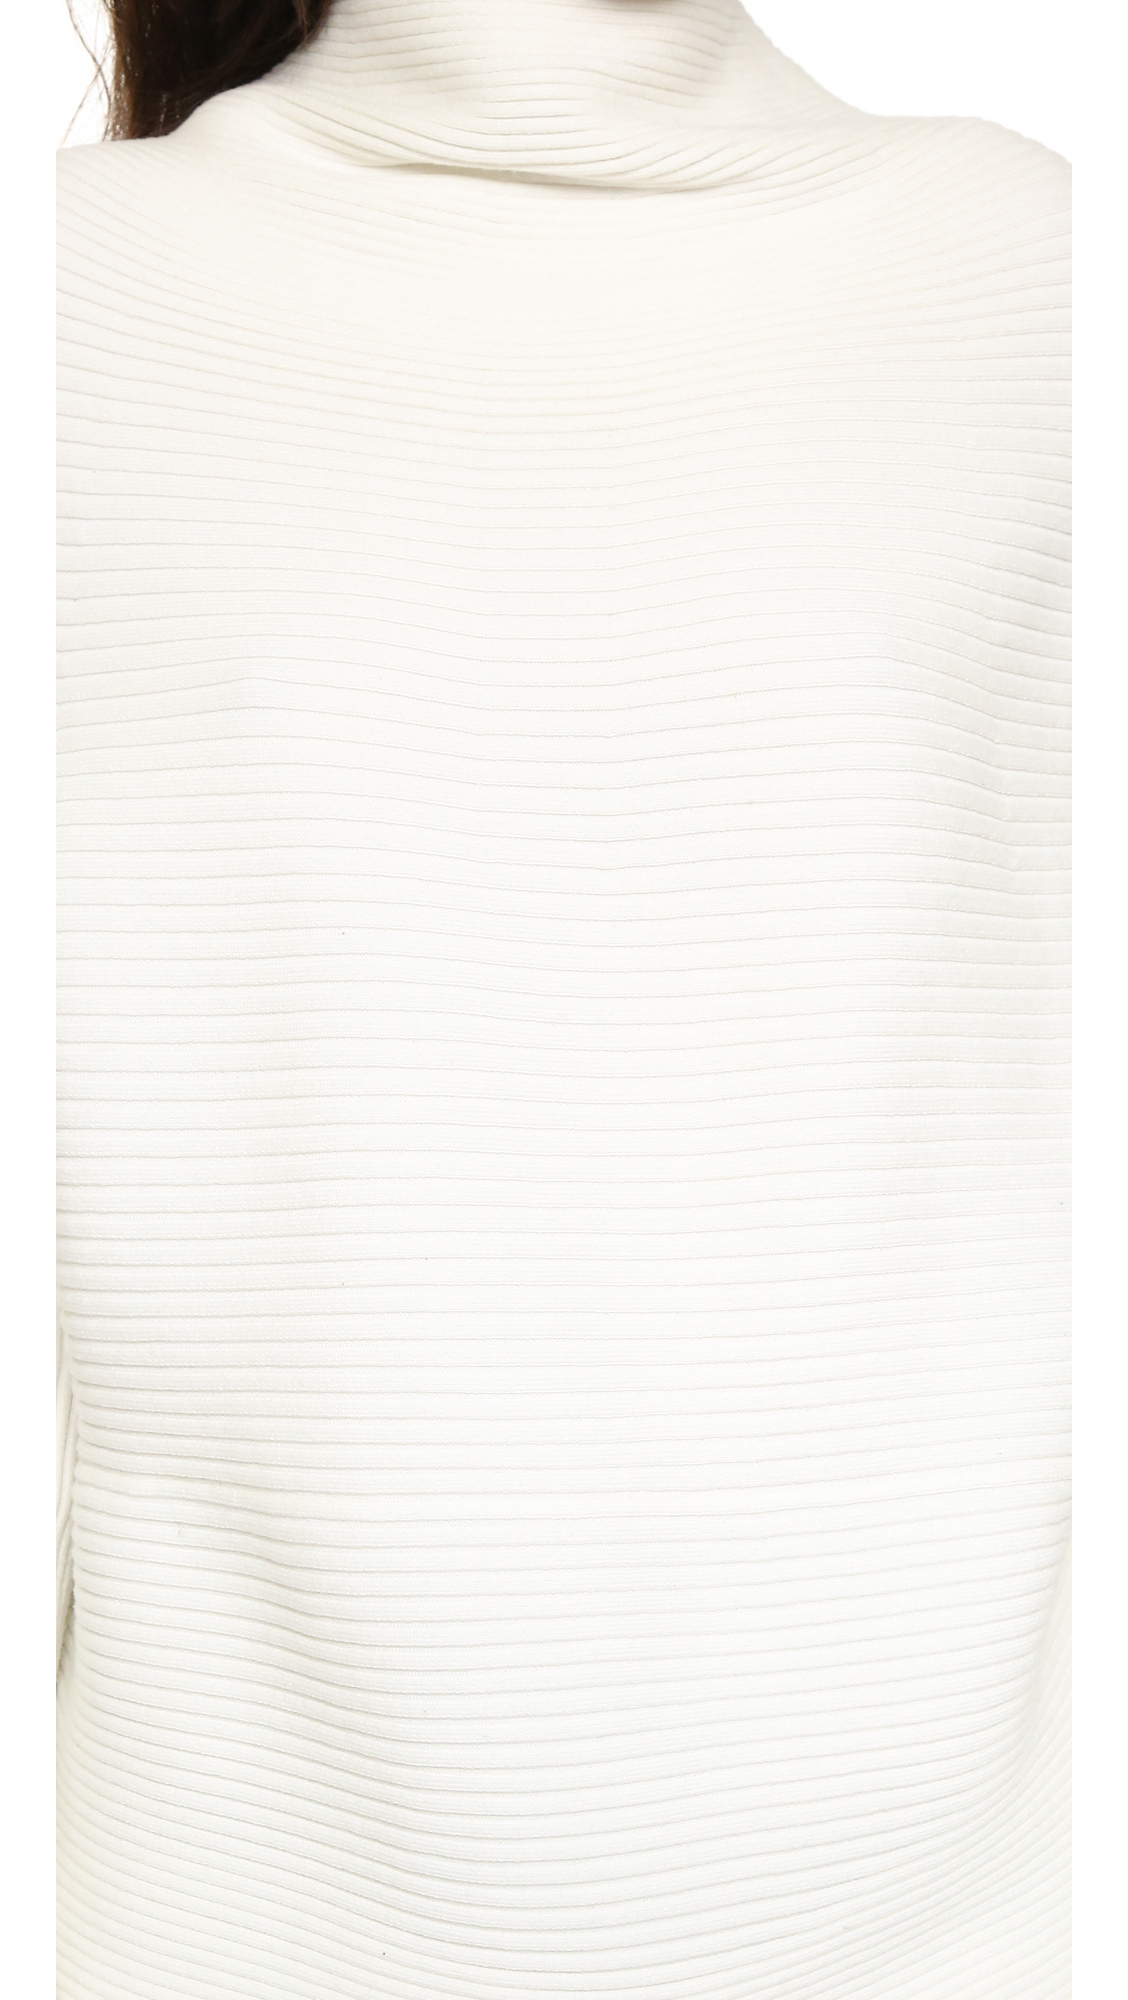 Designers Remix Cotton Ribly Drape Pullover in Ivory (White) - Lyst